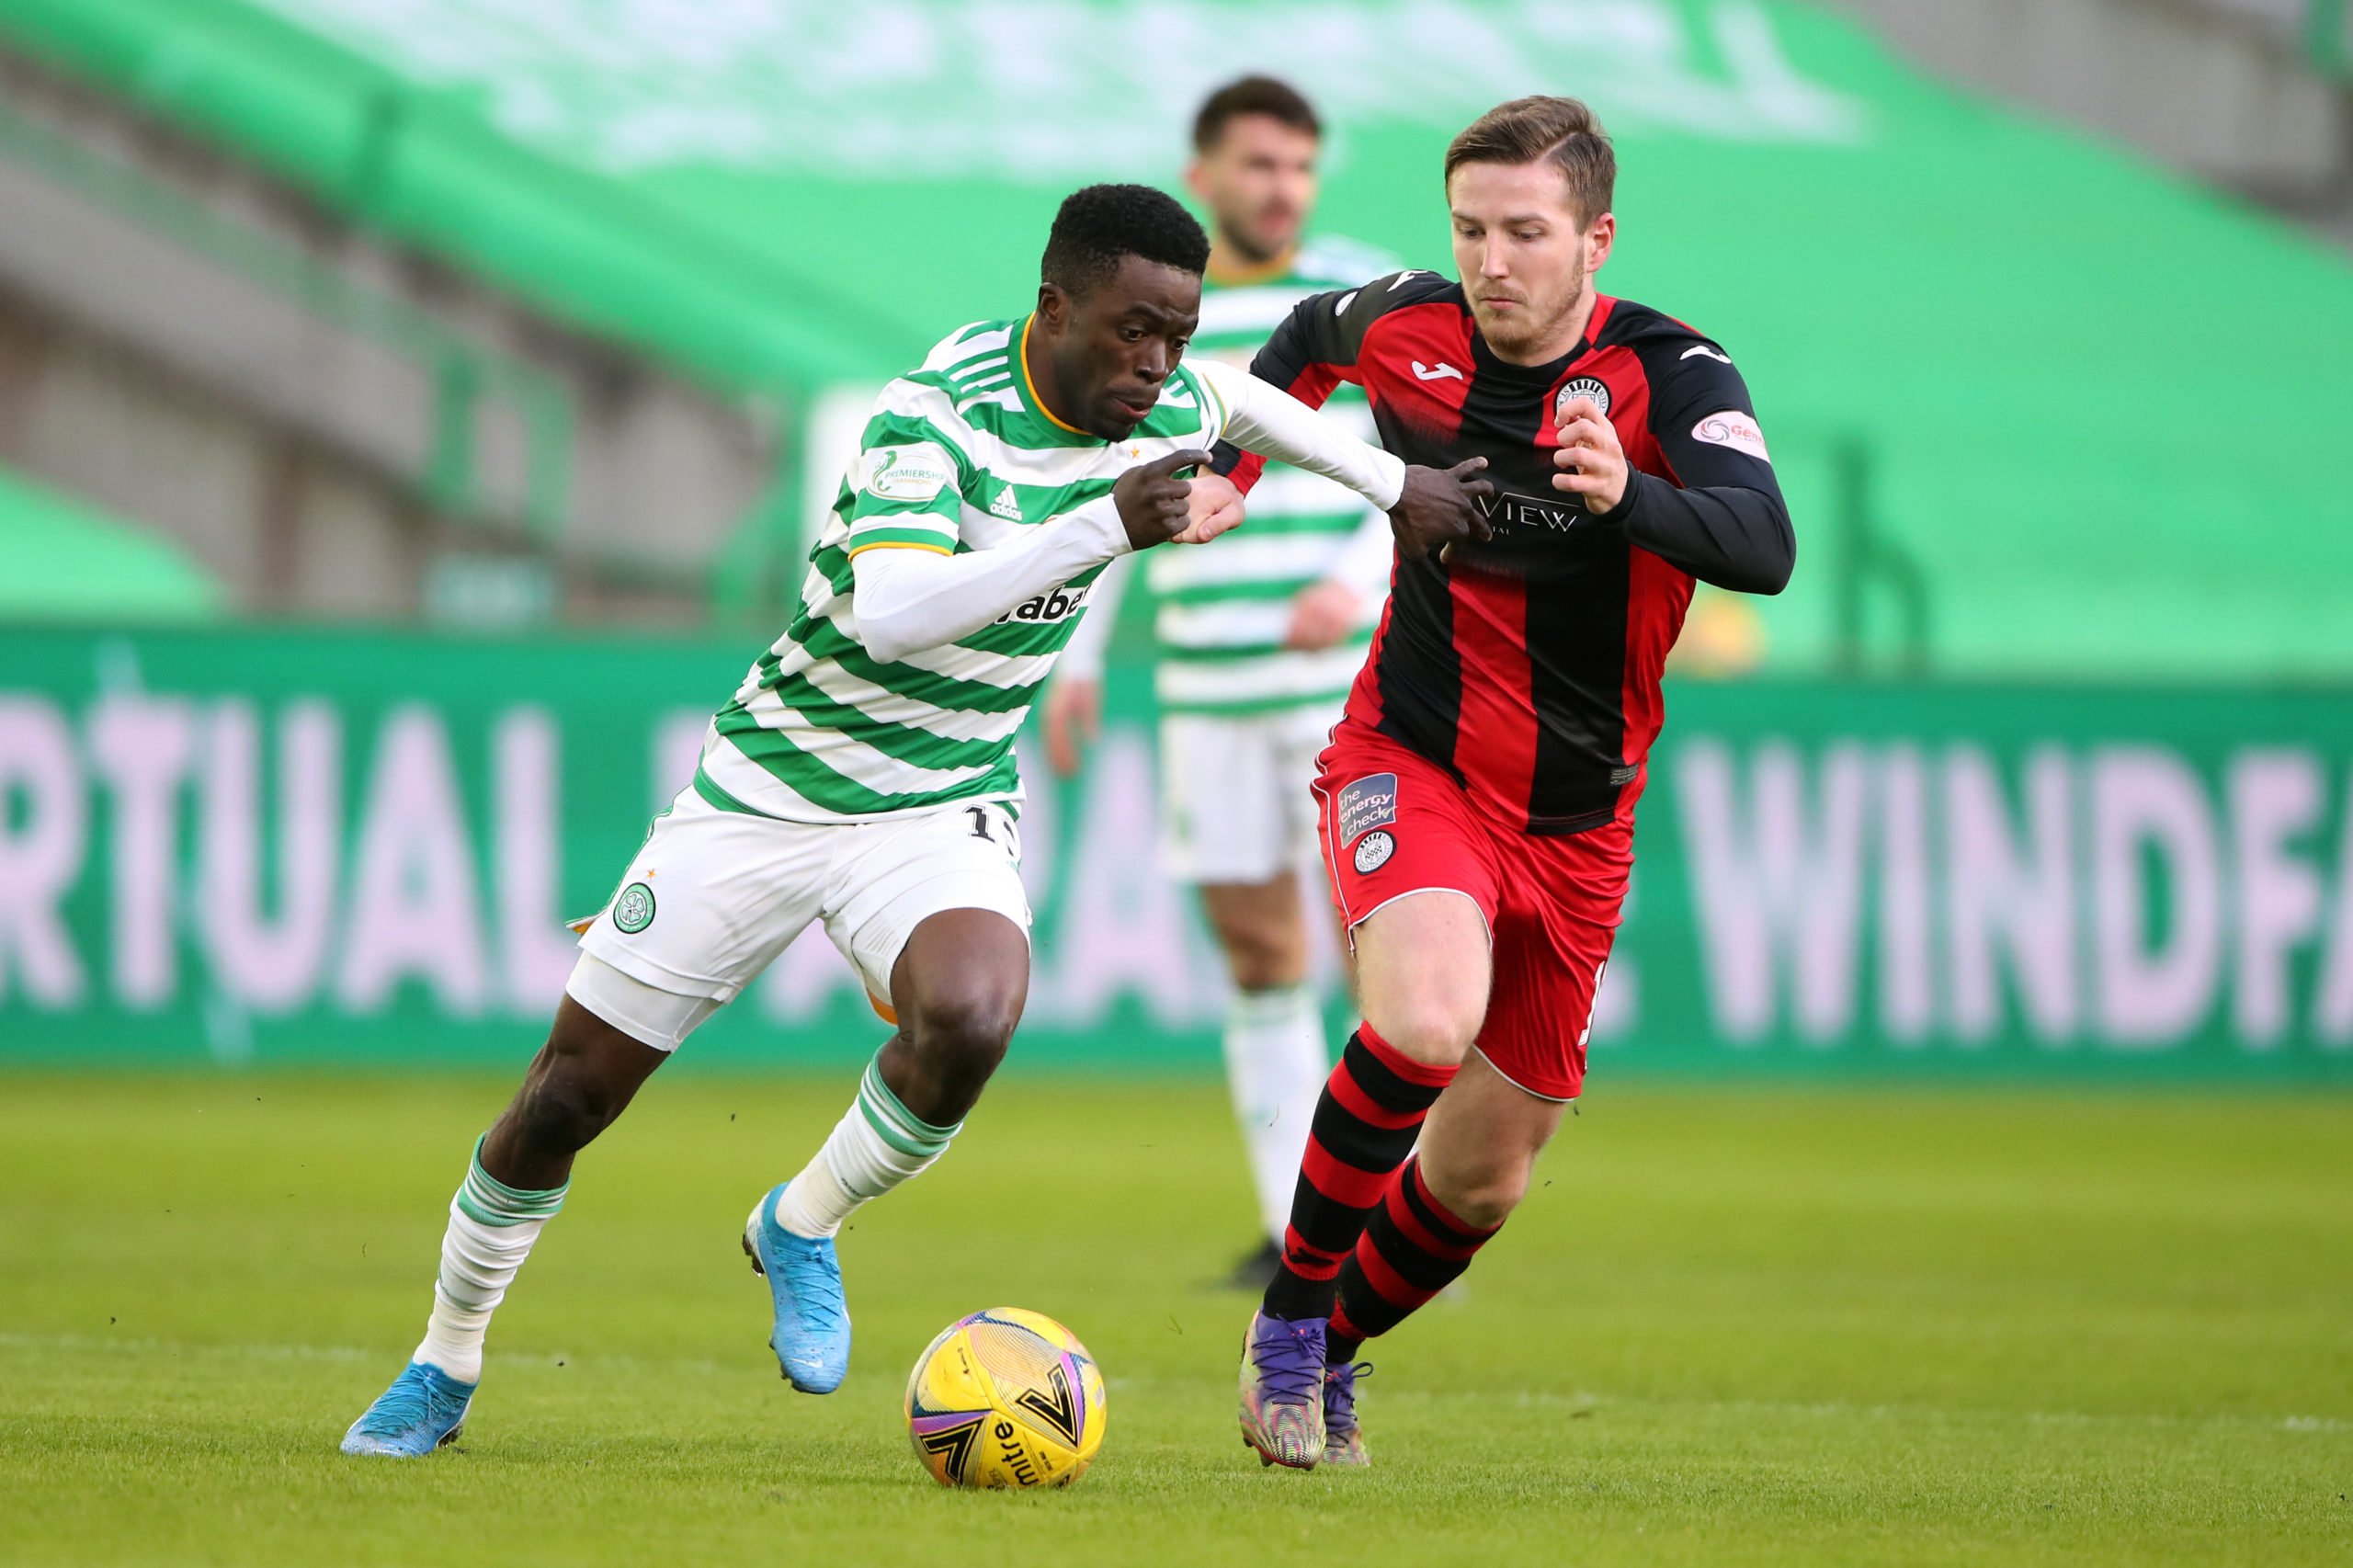 If Ismaila Soro rumours are true, Celtic ought to demand huge fee